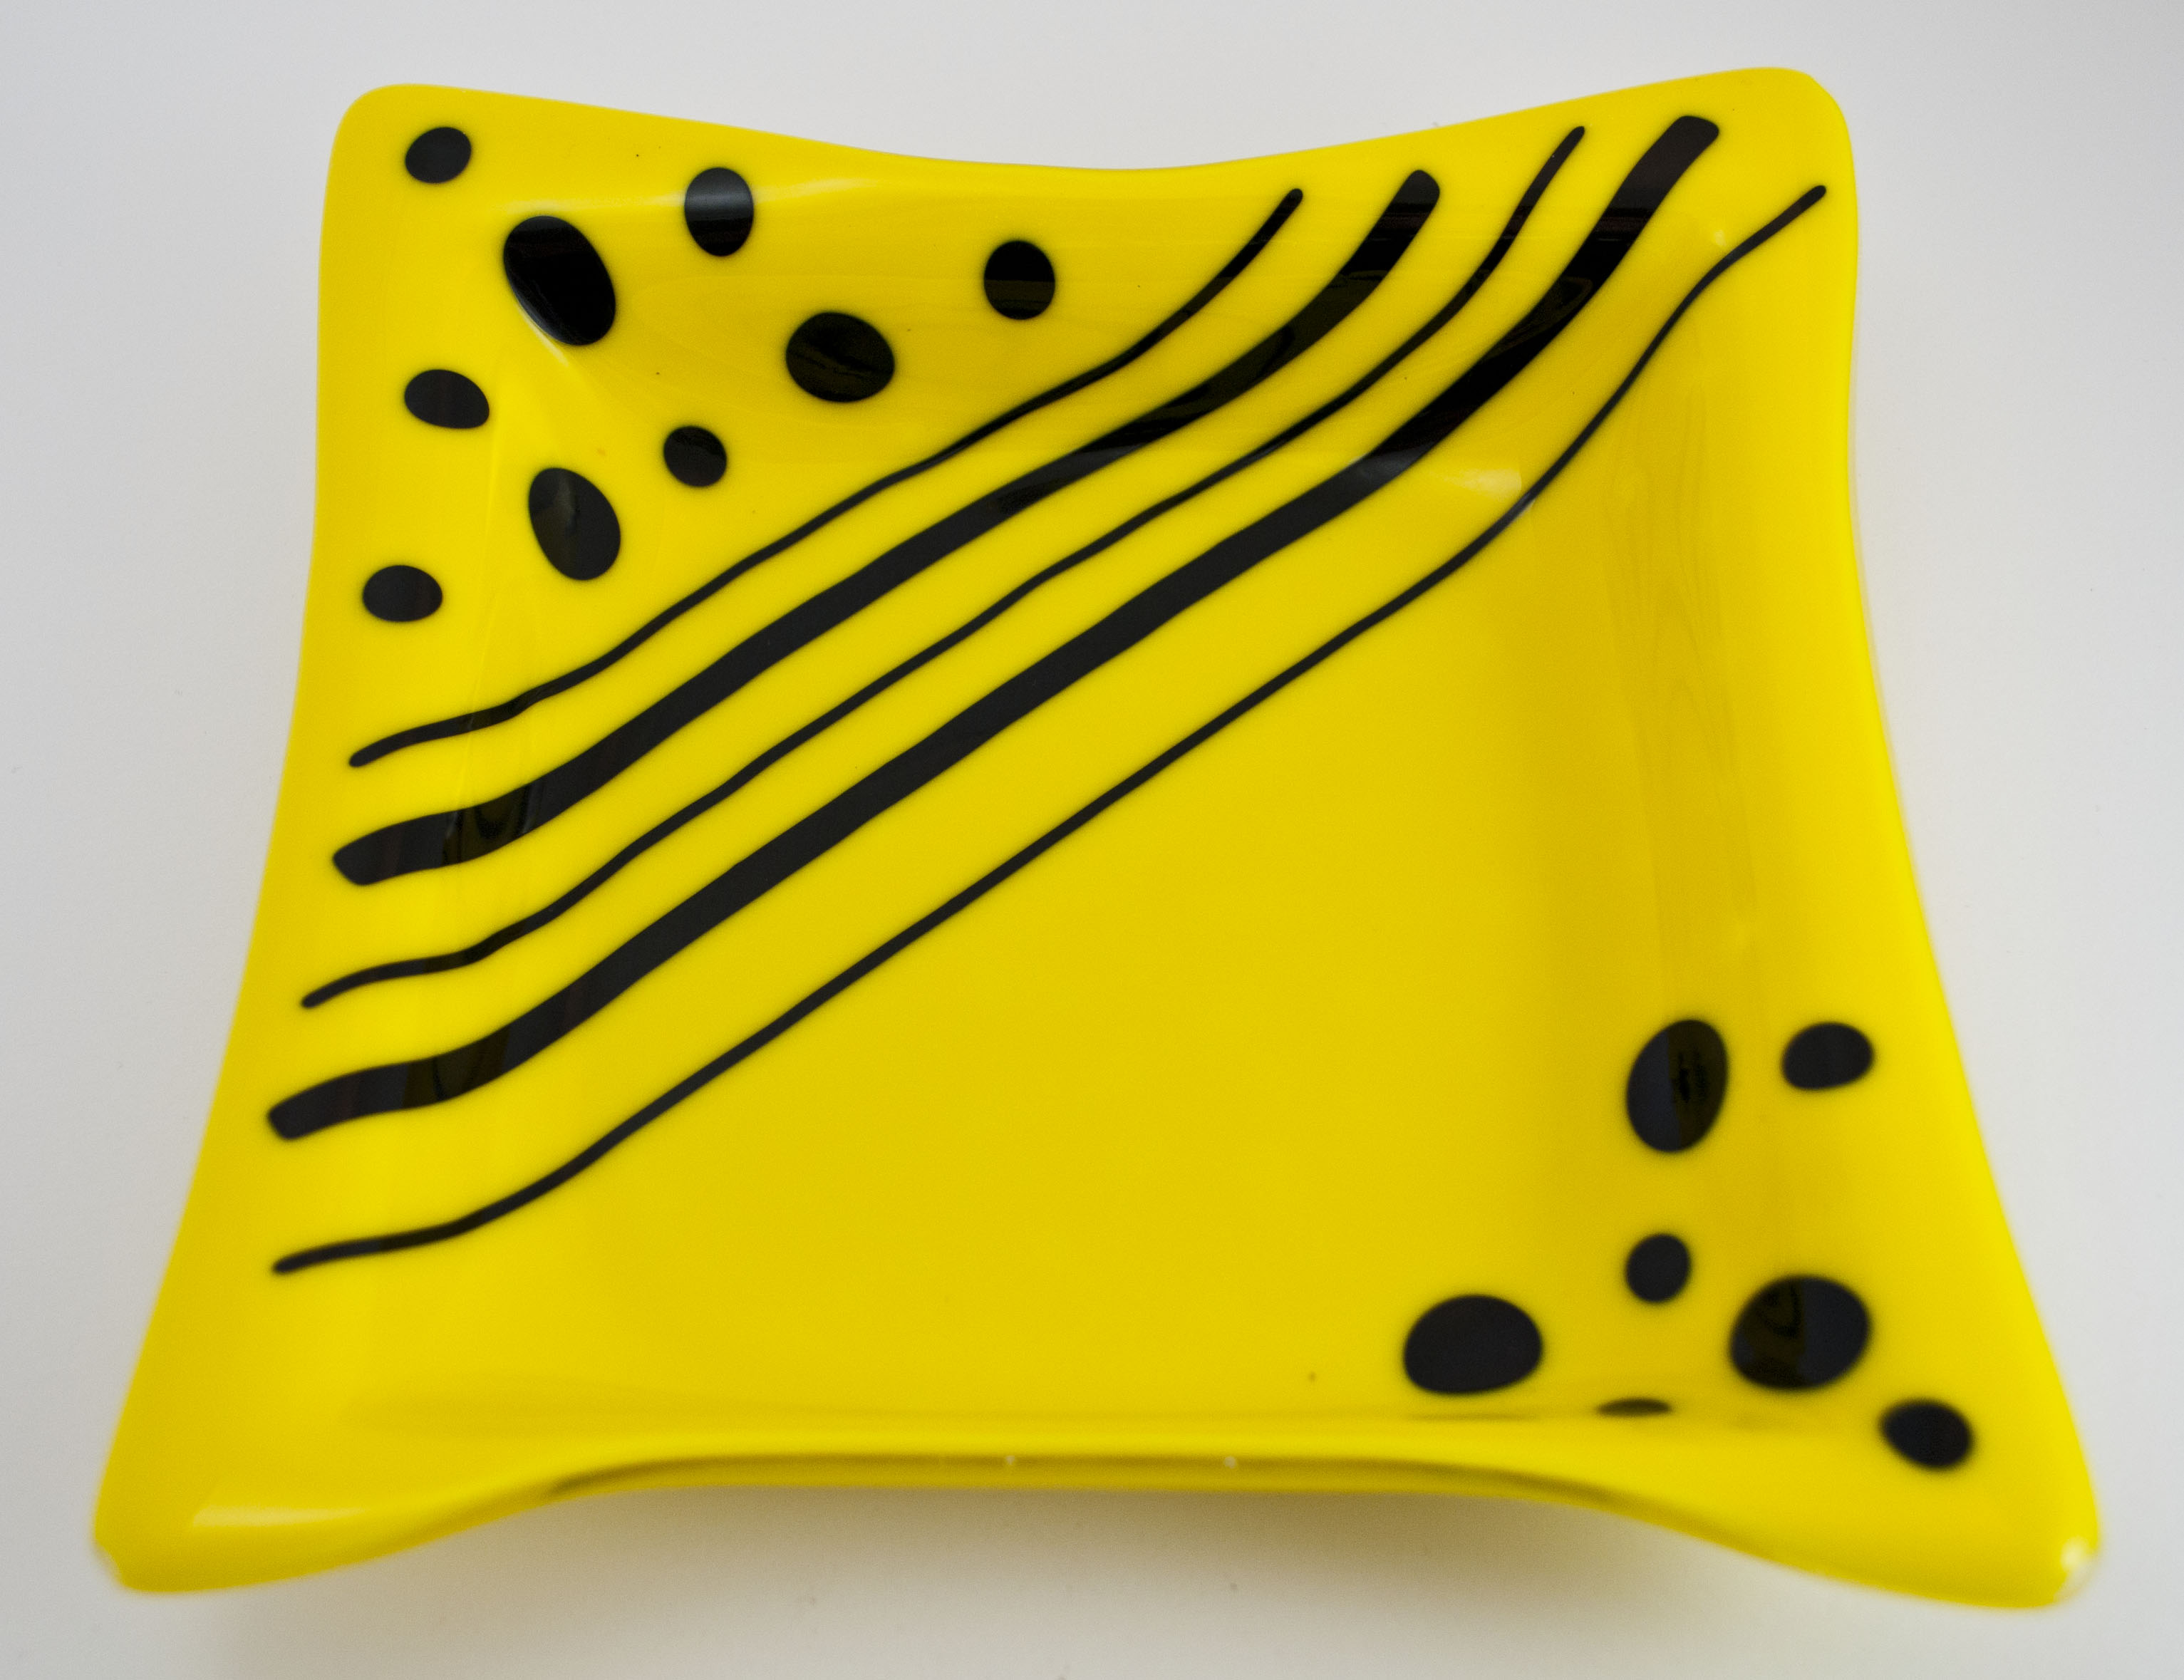 Yellow dish with black dots stripes